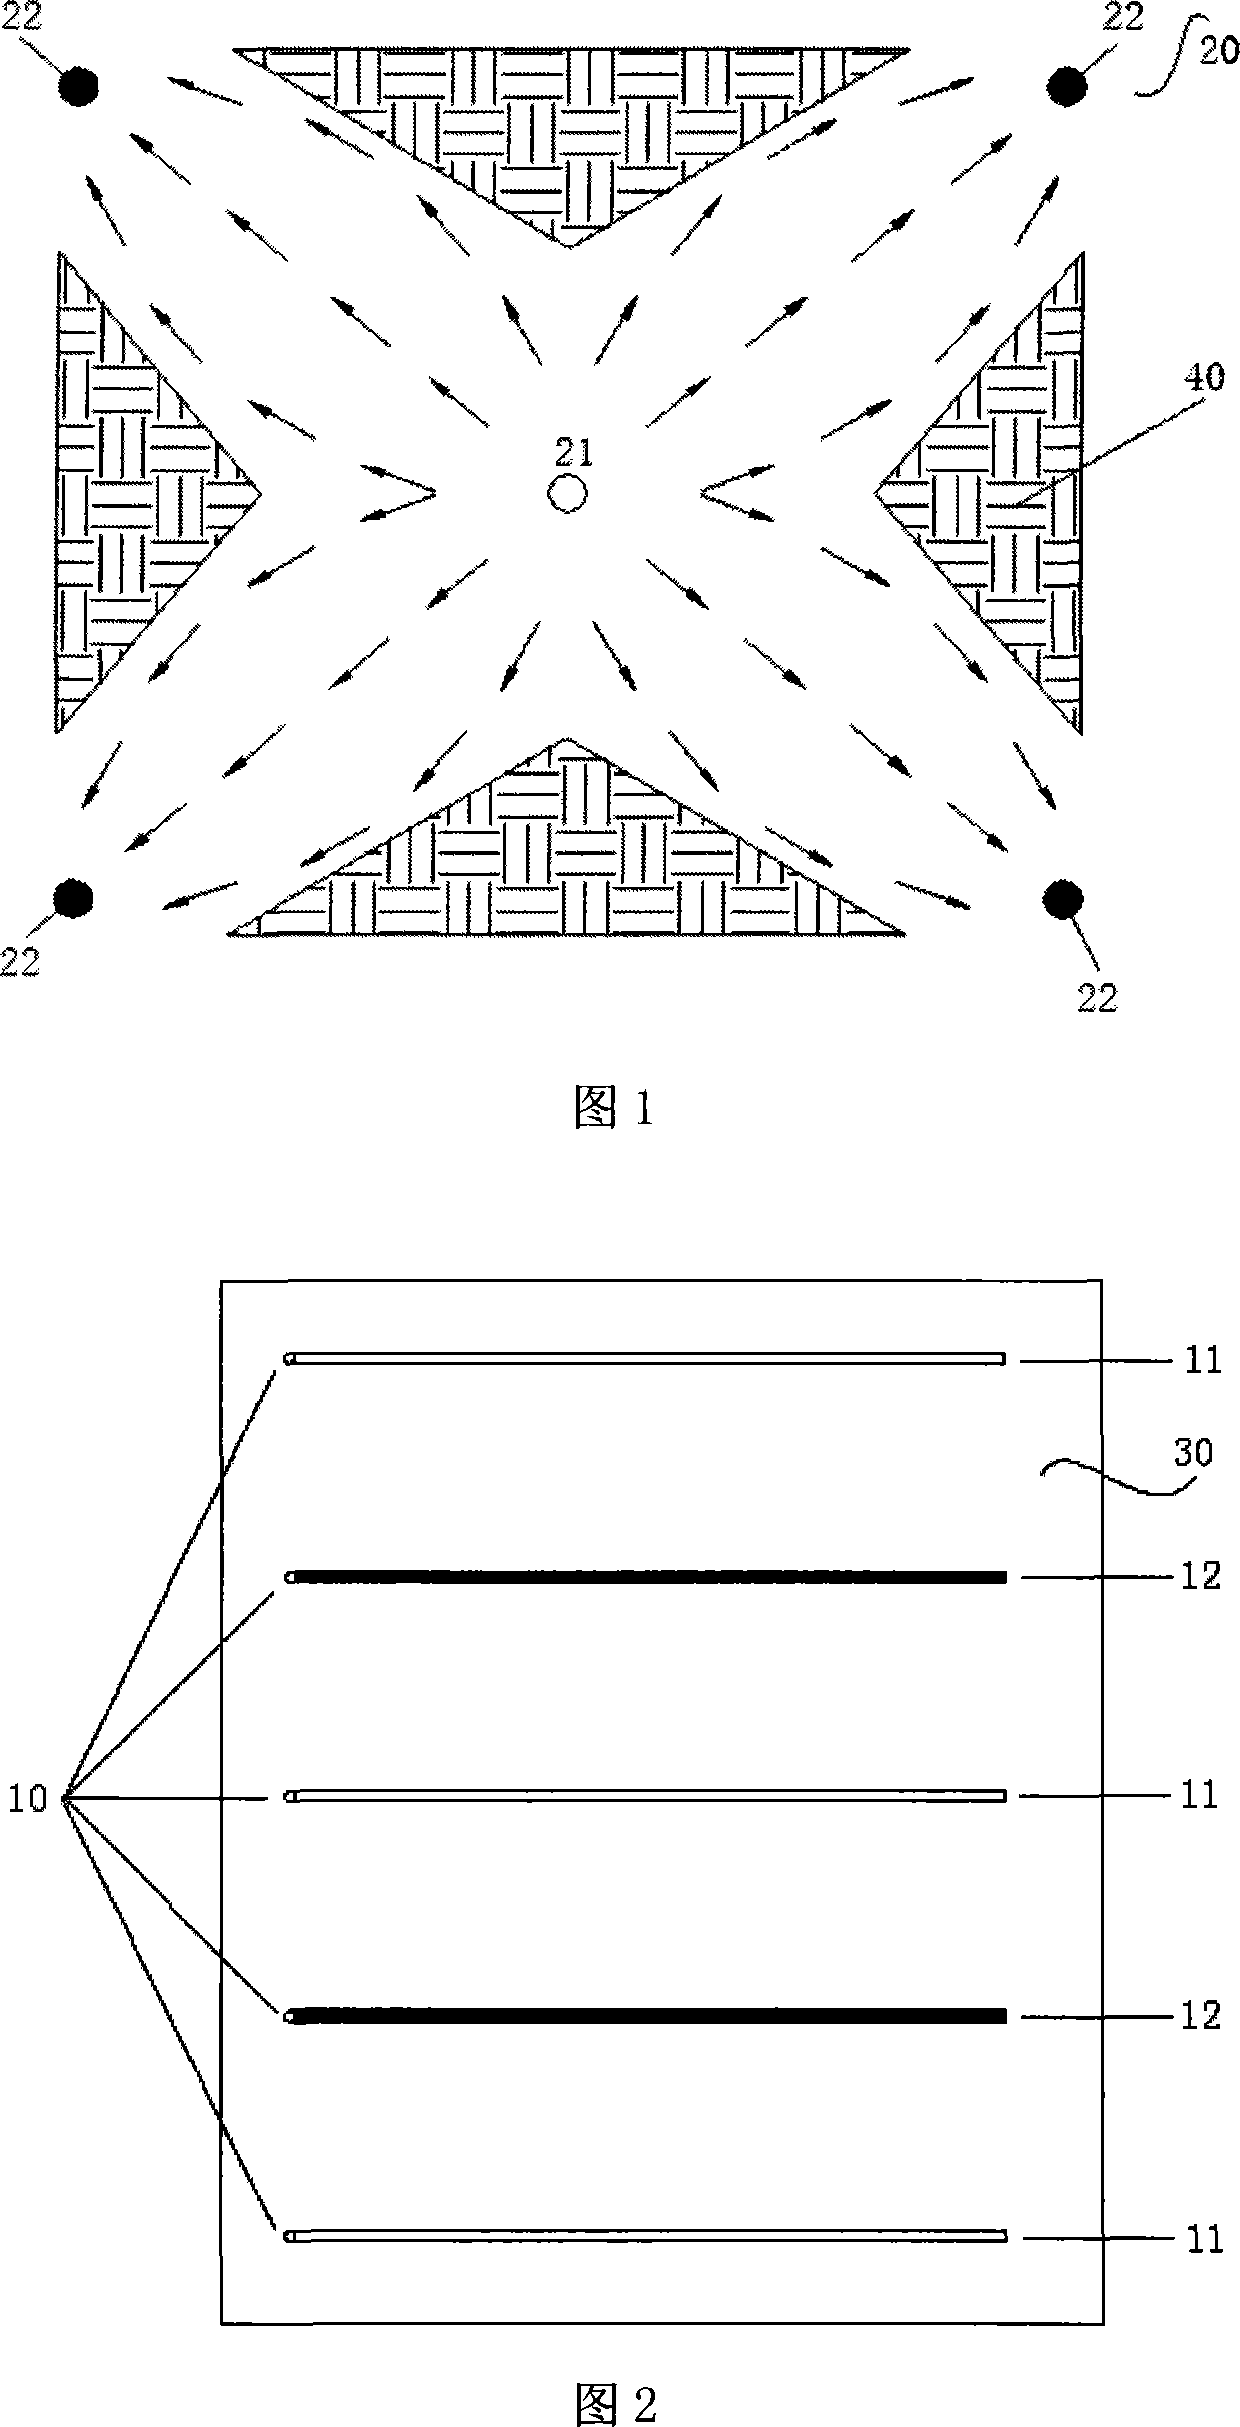 Mixed gas displacement method for coalbed methane in horizontal well